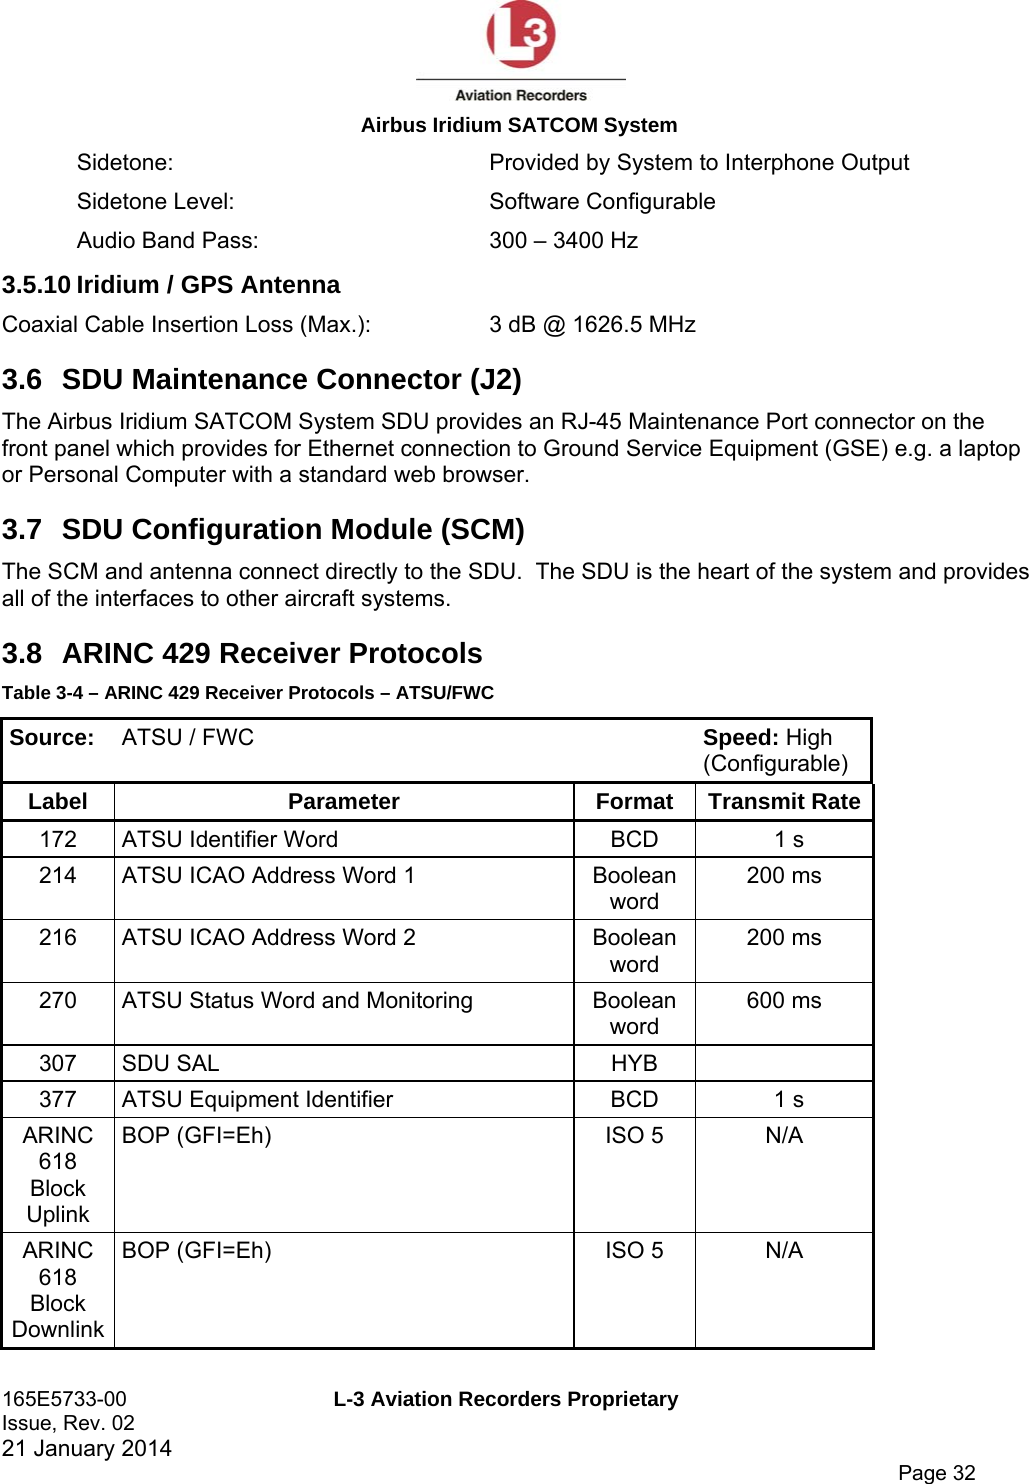  Airbus Iridium SATCOM System 165E5733-00  L-3 Aviation Recorders Proprietary Issue, Rev. 02   21 January 2014      Page 32 Sidetone:  Provided by System to Interphone Output Sidetone Level:  Software Configurable Audio Band Pass:  300 – 3400 Hz 3.5.10 Iridium / GPS Antenna Coaxial Cable Insertion Loss (Max.):  3 dB @ 1626.5 MHz 3.6  SDU Maintenance Connector (J2) The Airbus Iridium SATCOM System SDU provides an RJ-45 Maintenance Port connector on the front panel which provides for Ethernet connection to Ground Service Equipment (GSE) e.g. a laptop or Personal Computer with a standard web browser. 3.7  SDU Configuration Module (SCM) The SCM and antenna connect directly to the SDU.  The SDU is the heart of the system and provides all of the interfaces to other aircraft systems. 3.8  ARINC 429 Receiver Protocols Table 3-4 – ARINC 429 Receiver Protocols – ATSU/FWC Source:  ATSU / FWC  Speed: High (Configurable) Label Parameter Format Transmit Rate 172  ATSU Identifier Word  BCD  1 s 214  ATSU ICAO Address Word 1  Boolean word 200 ms 216  ATSU ICAO Address Word 2  Boolean word 200 ms 270  ATSU Status Word and Monitoring  Boolean word 600 ms 307 SDU SAL  HYB   377  ATSU Equipment Identifier  BCD  1 s ARINC 618 Block Uplink BOP (GFI=Eh)  ISO 5  N/A ARINC 618 Block Downlink BOP (GFI=Eh)  ISO 5  N/A 